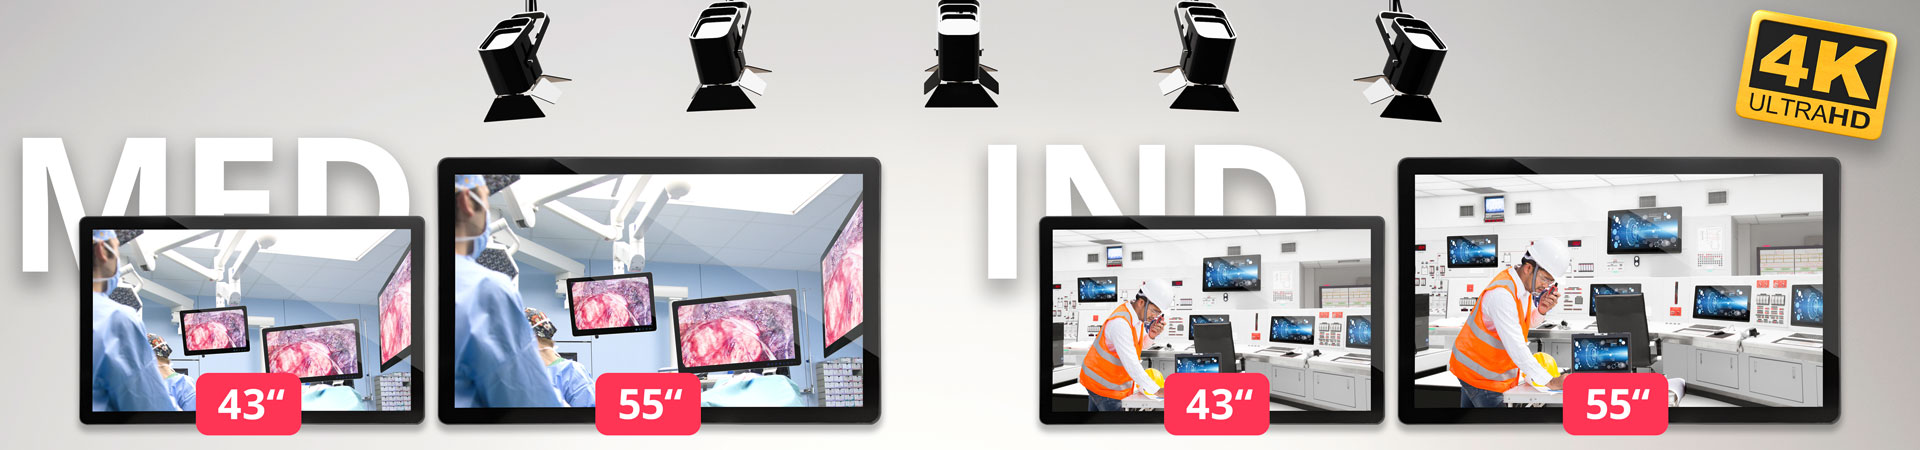 Full Banner - canvys 4K Monitors Medical and Industrial